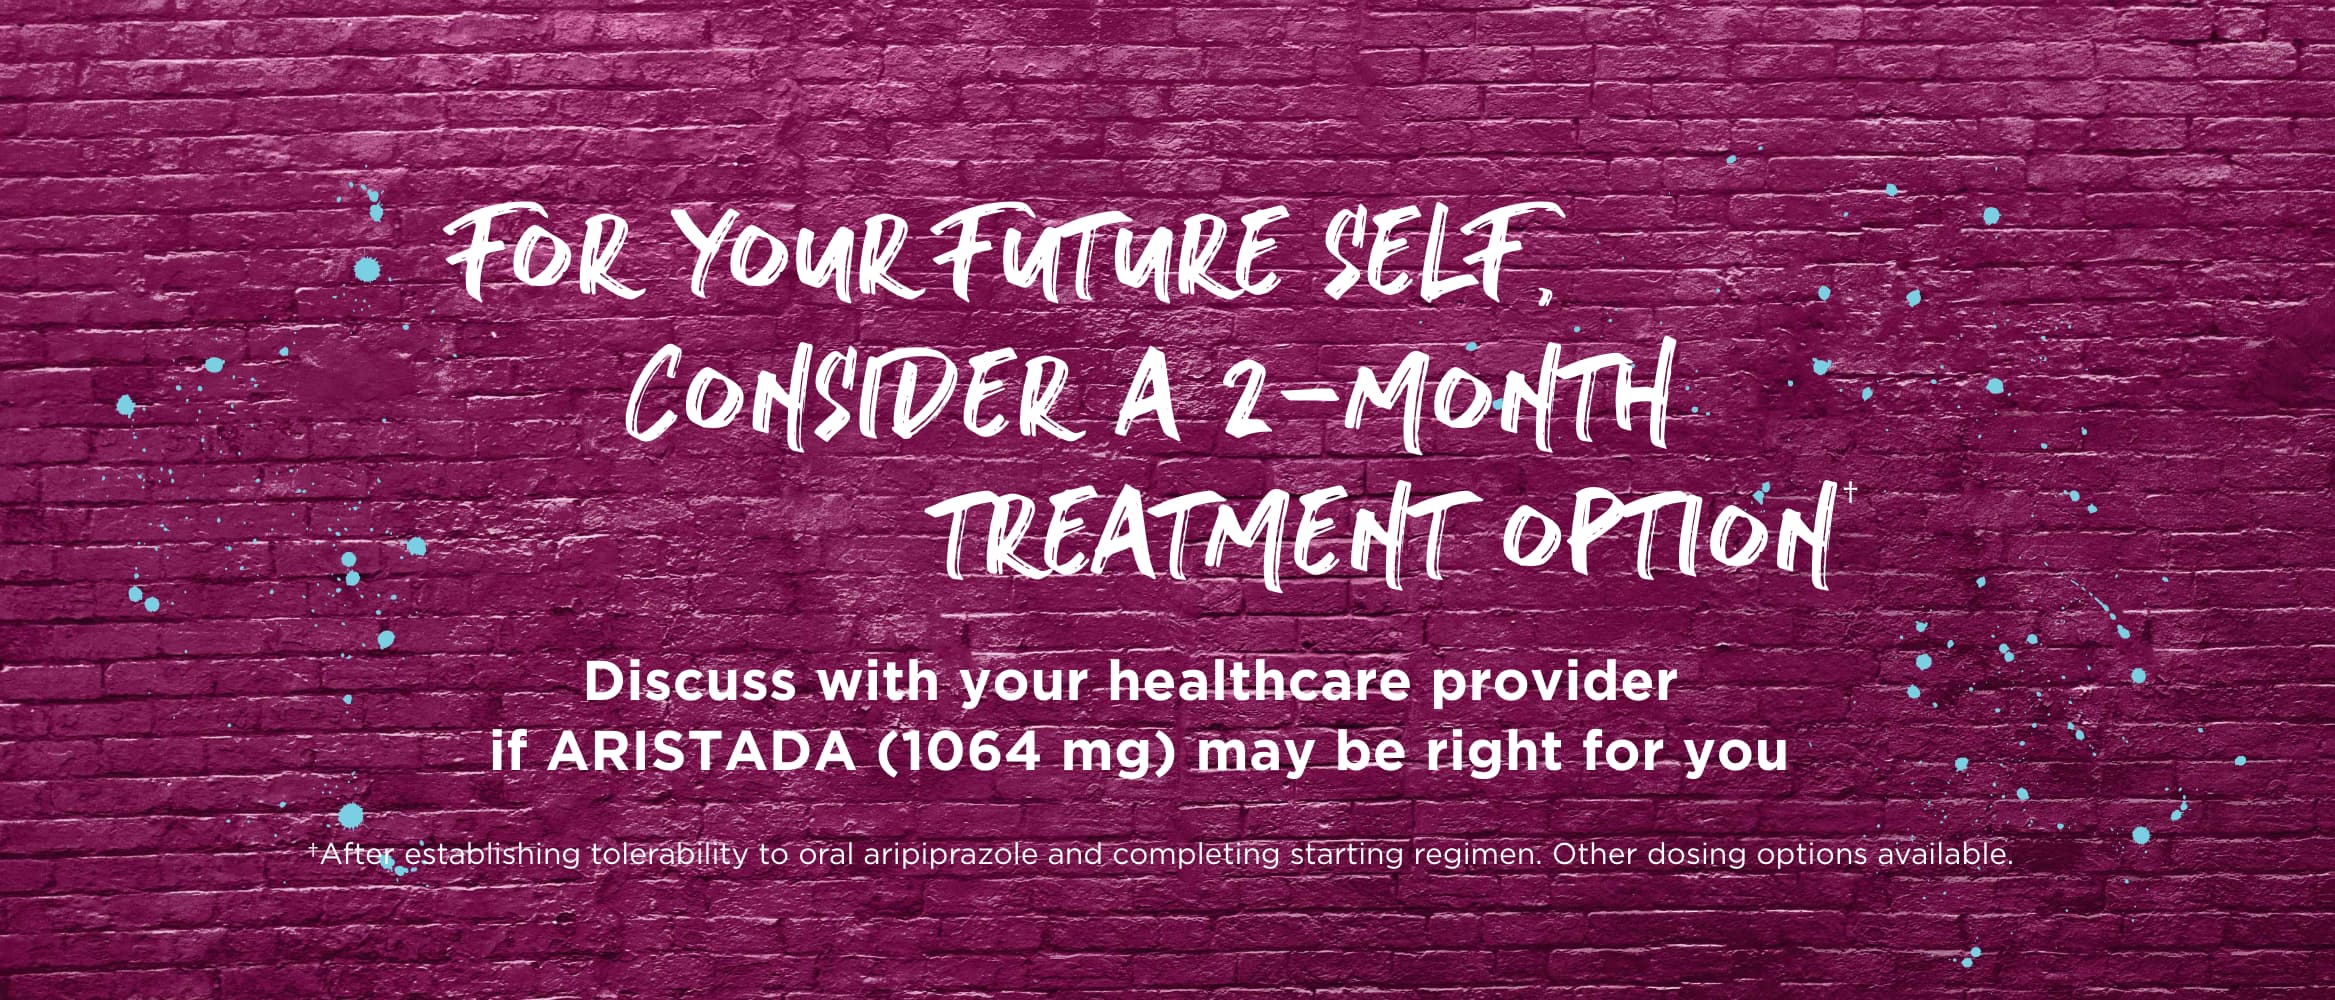 Consider a 2-month ARISTADA® (aripiprazole lauroxil) LAI treatment option. Discuss with your healthcare provider.